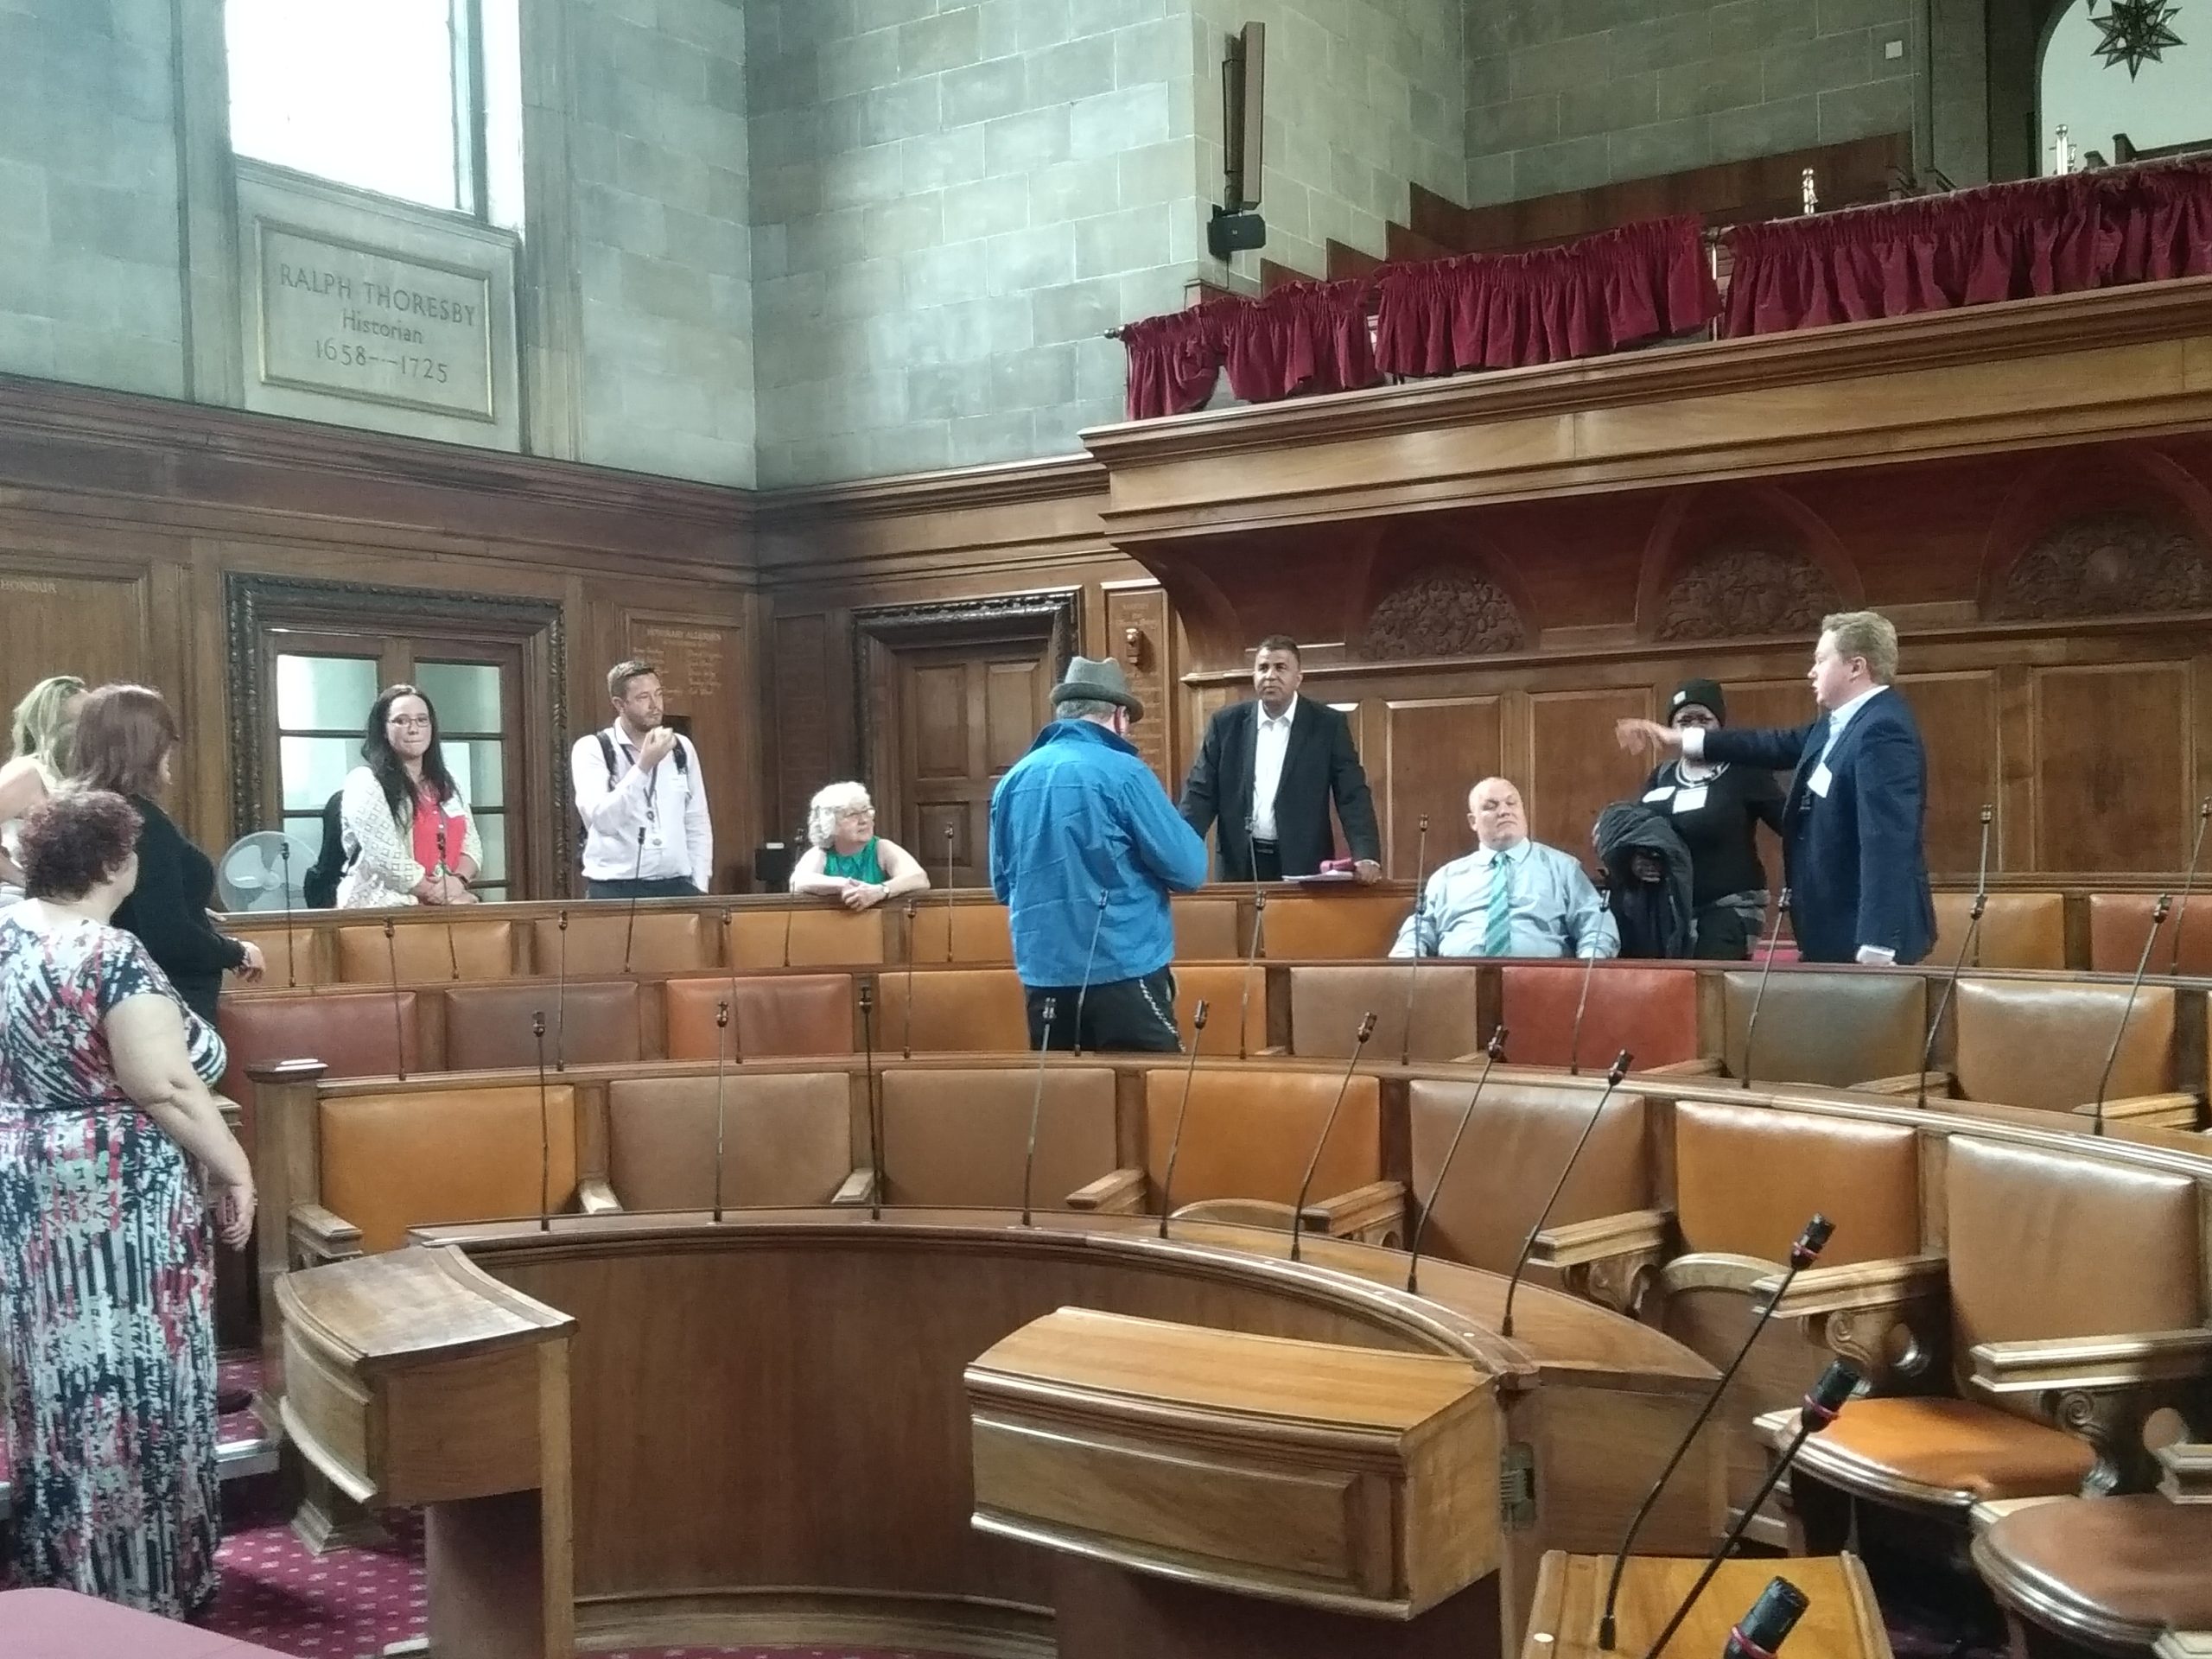 Council Chamber Takeover: Tuesday 20th June from 10am